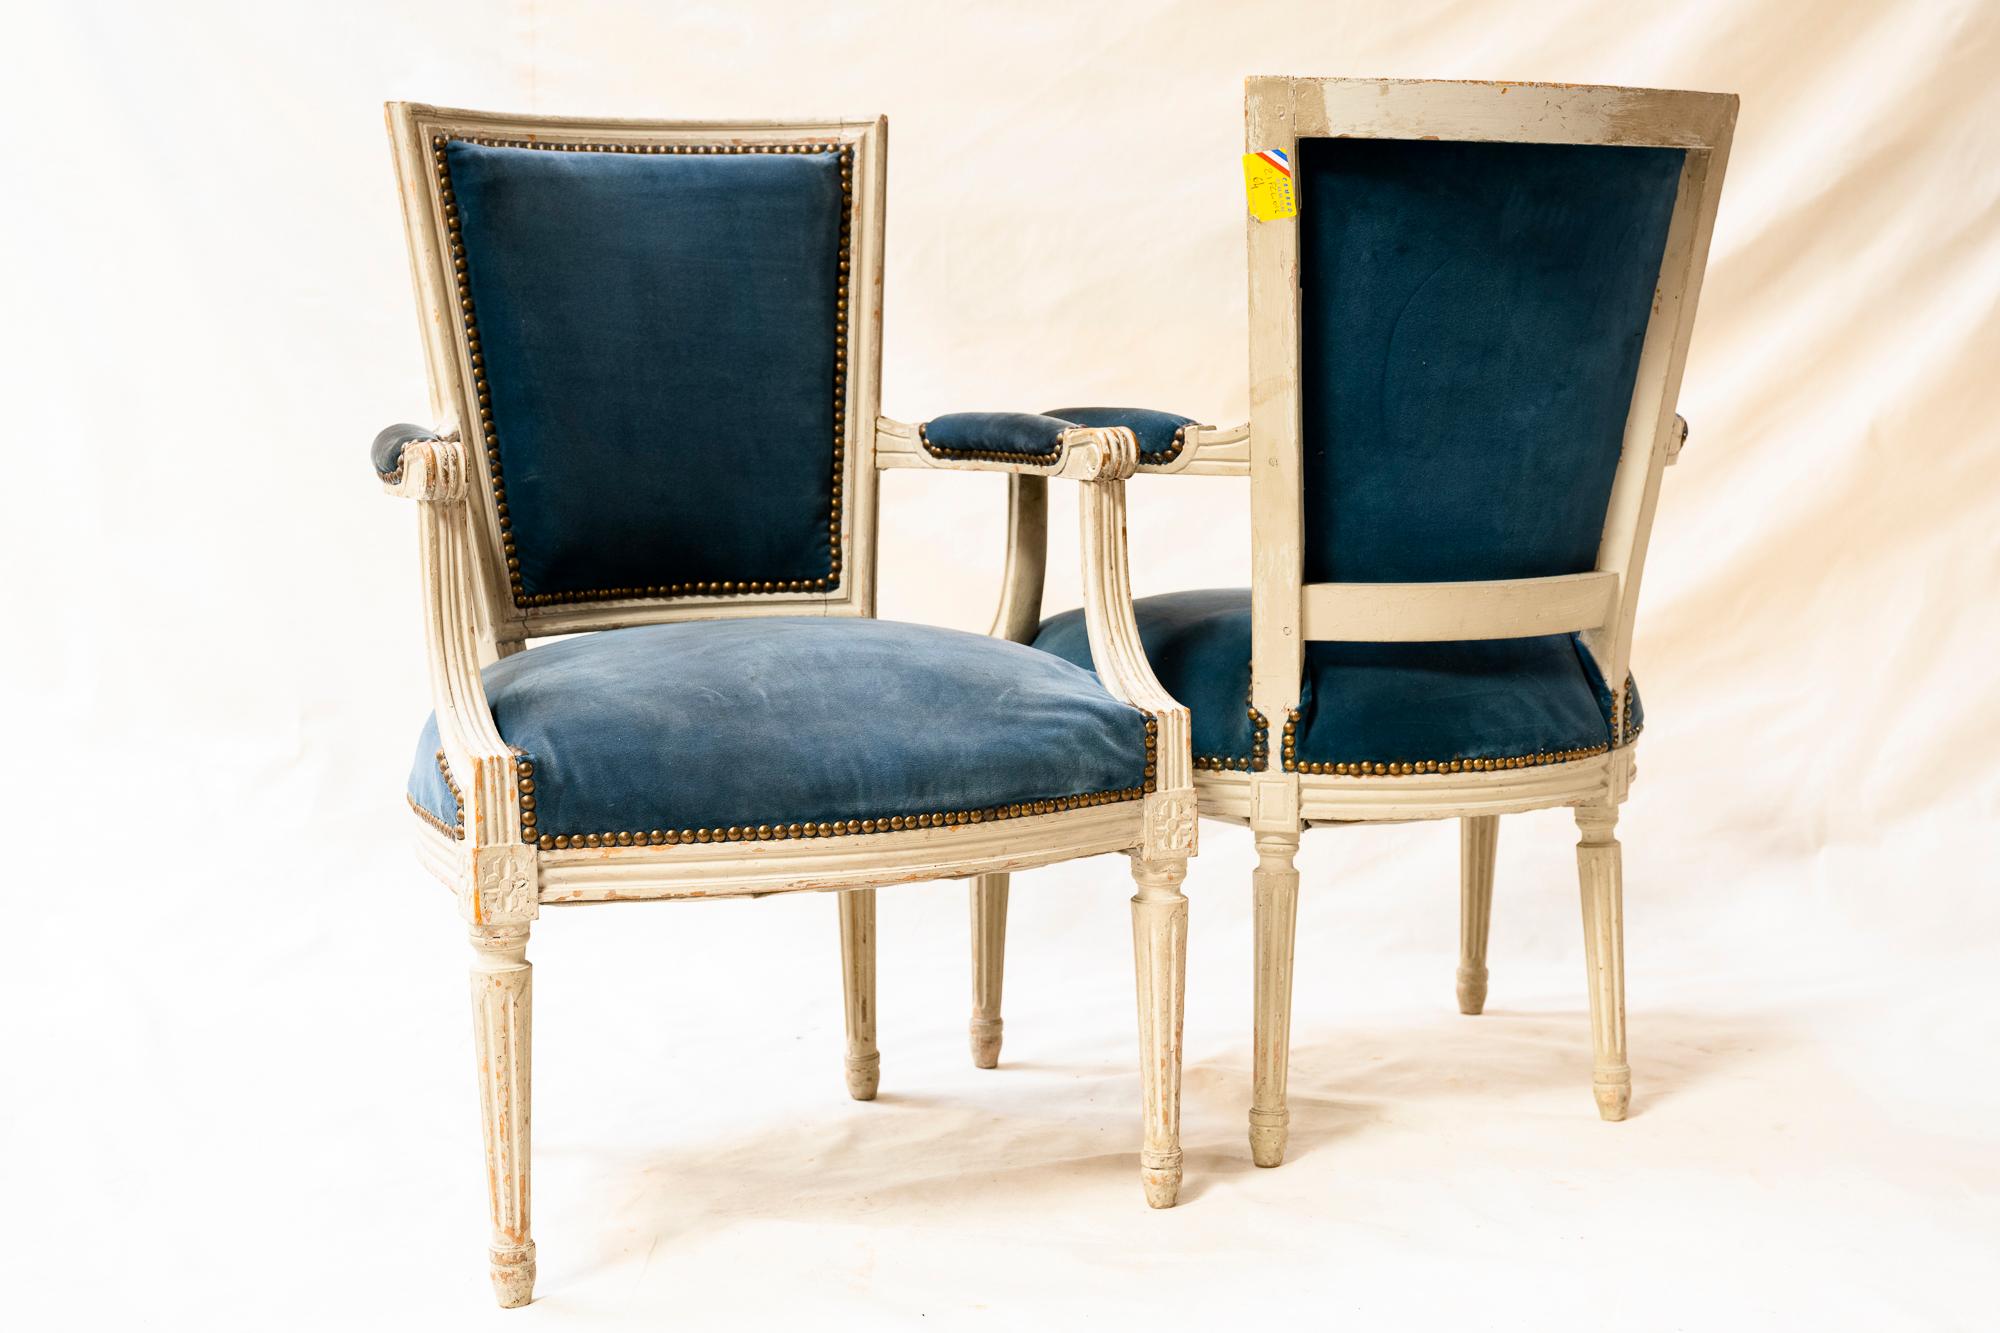 Pair of classic whitewashed Louis XVI armchairs with blue velvet, from a small chateau in the Dordogne valley. In excellent condition for their age, they may be kept as is, or refreshed with a newer fabric.